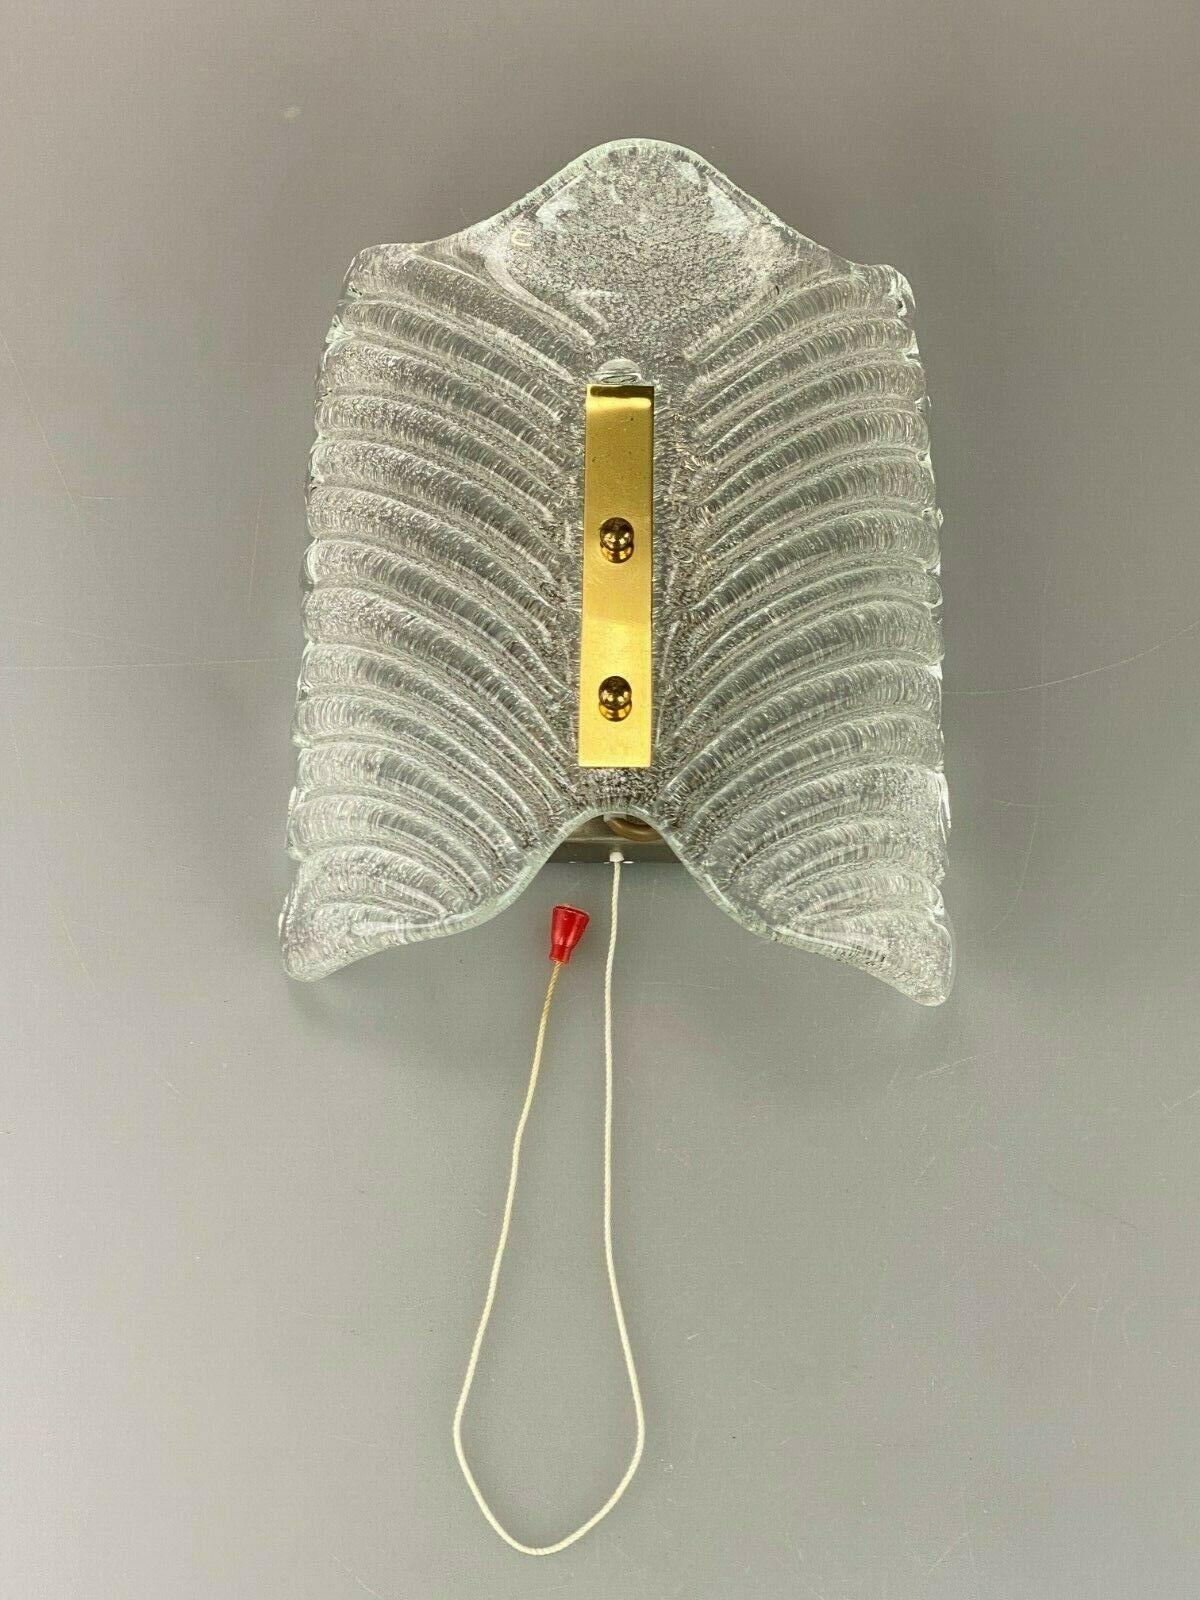 60s 70s Lamp Light Wall Lamp Wall Sconce Ice Glass Space Age Design

Object: wall lamp

Manufacturer: Fischer lights

Condition: good

Age: around 1960-1970

Dimensions:

20.5cm x 11.5cm x 23.5cm

Other notes:

The pictures serve as